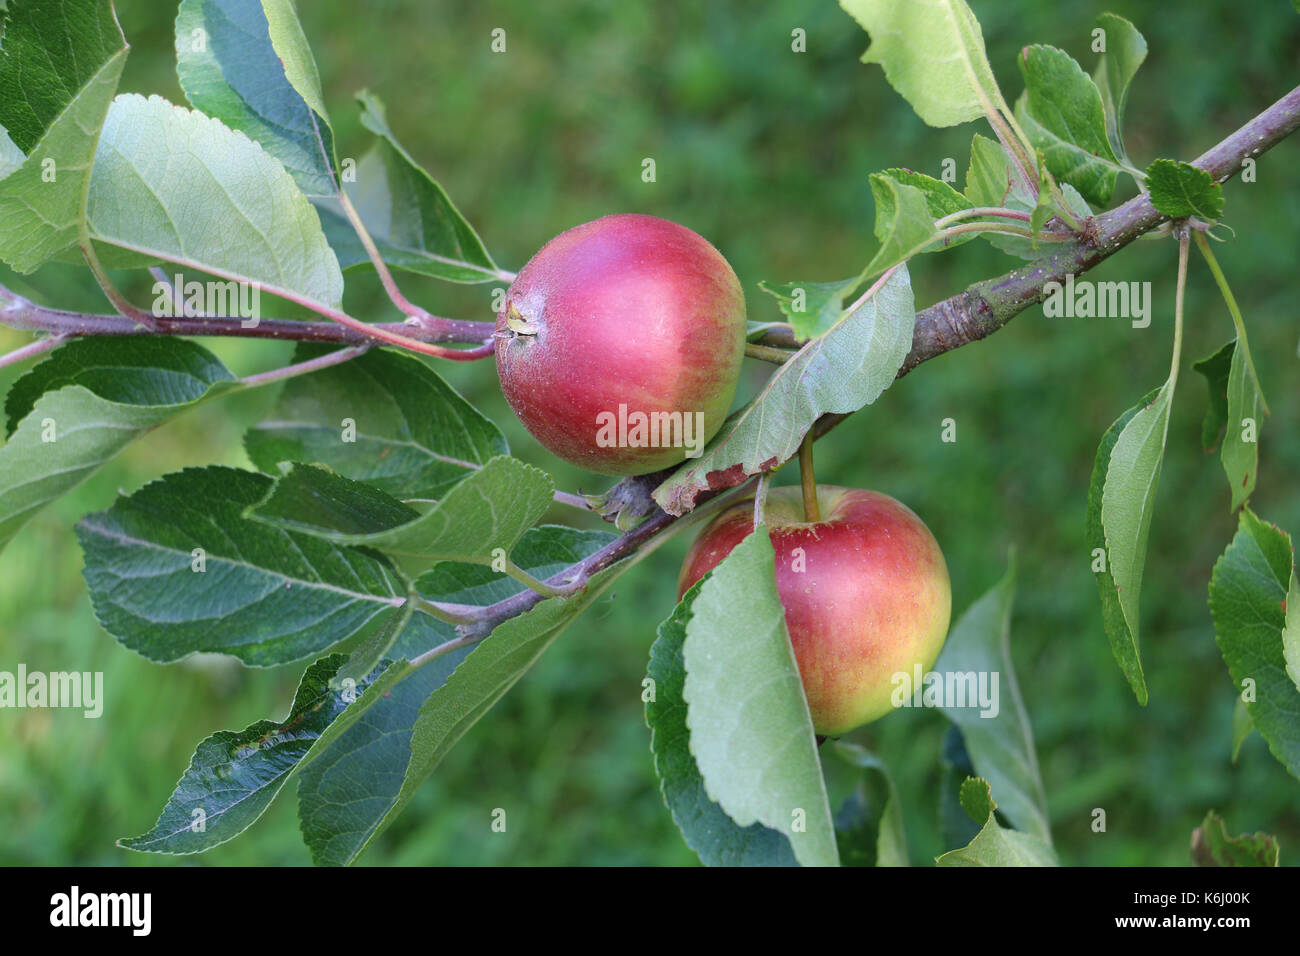 Two red Discovery Apples, Malus domestica fruit, on an apple tree branch in late summer, Shropshire, England. Stock Photo